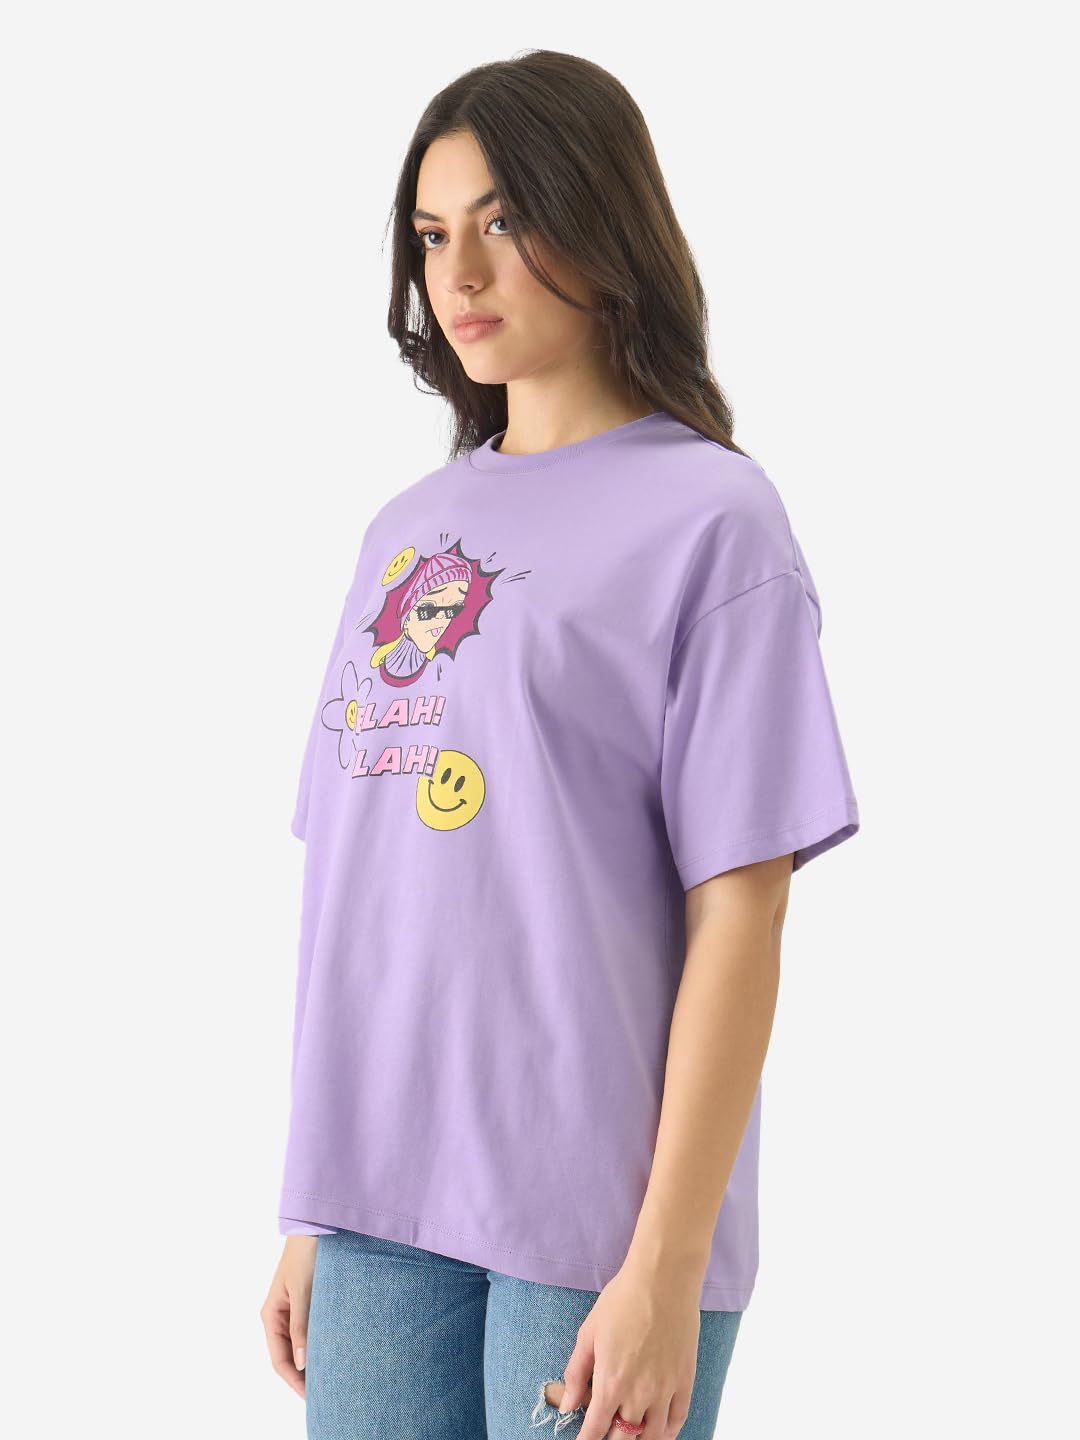 The Souled Store Don't Care Club Women and Girls Short Sleeve Round Neck Purple Graphic Printed Cotton Oversized Fit T-Shirts Oversized T Shirts for Women T-Shirt Girls Cotton Casual Half Sleeves